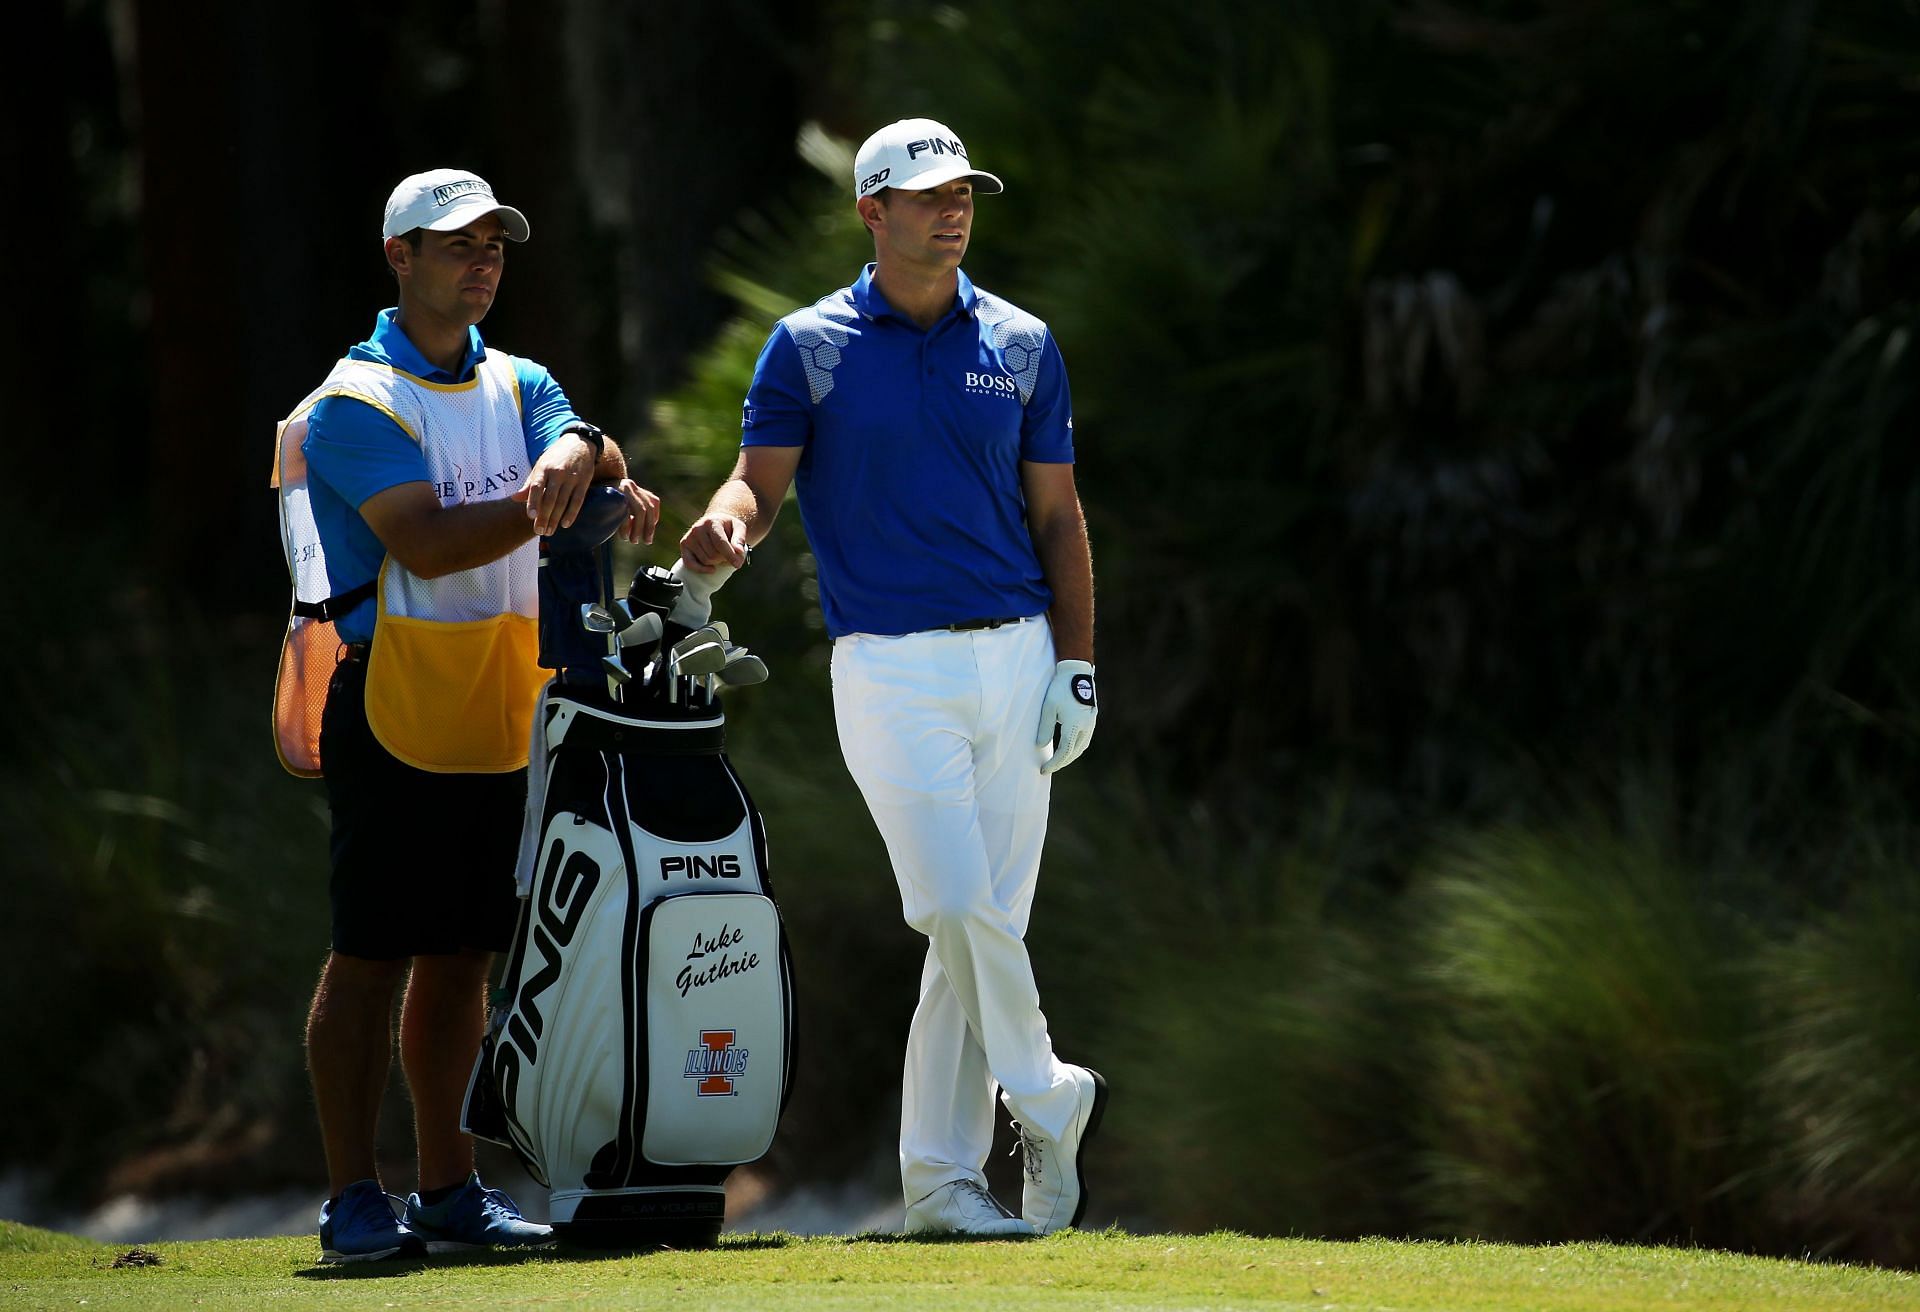 Zach Guthrie with his brother Luke Guthrie at THE PLAYERS Championship (Image via Getty)